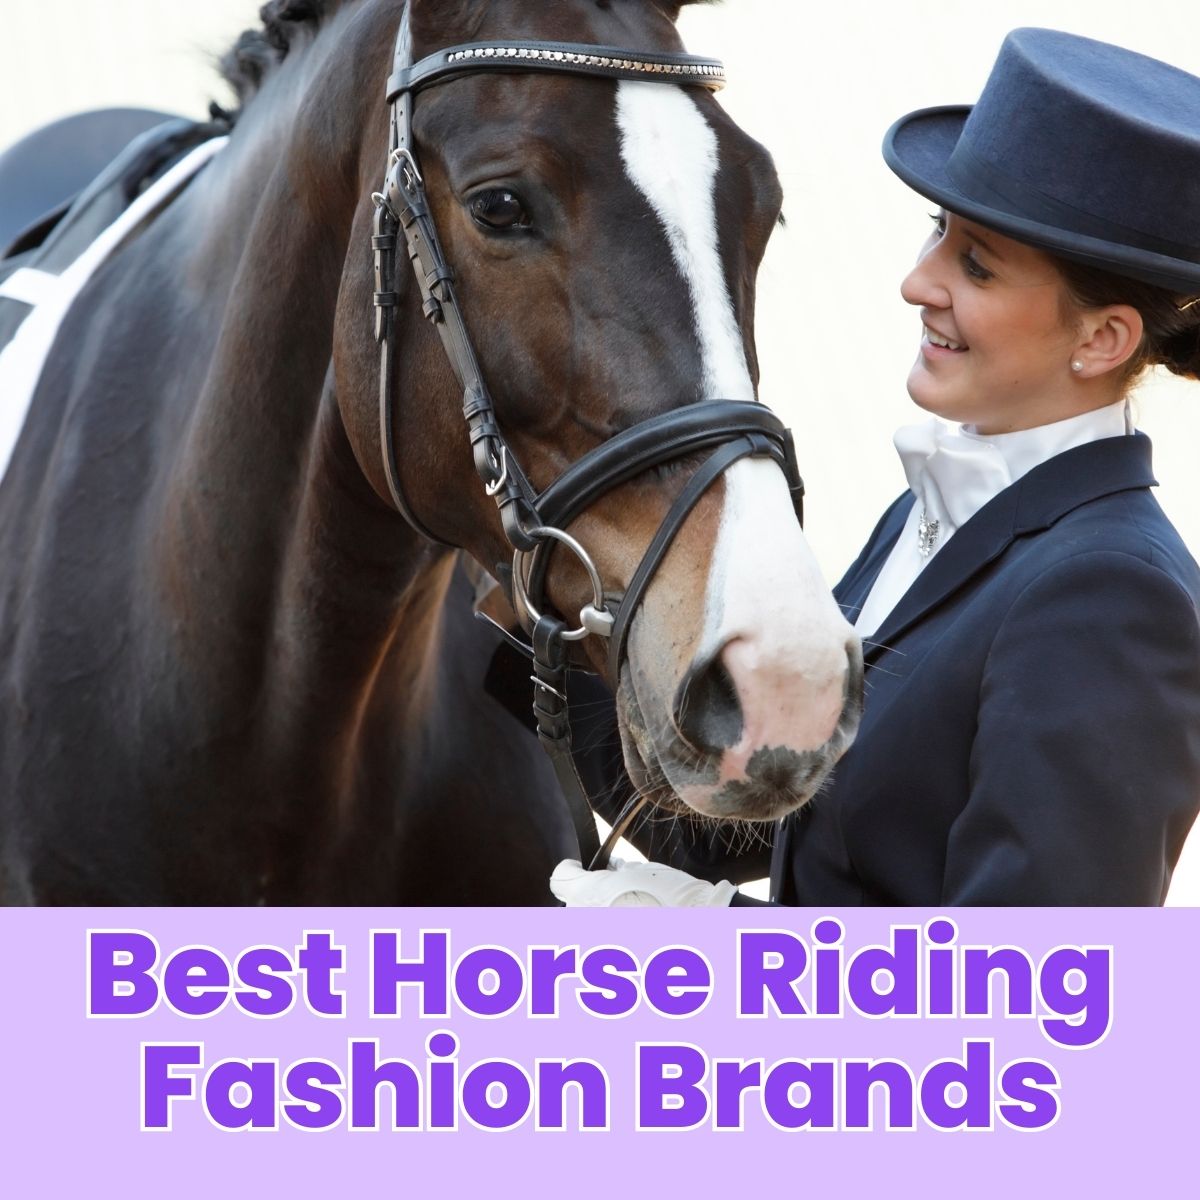 You are currently viewing The 10 Best Horse Riding Fashion Brands